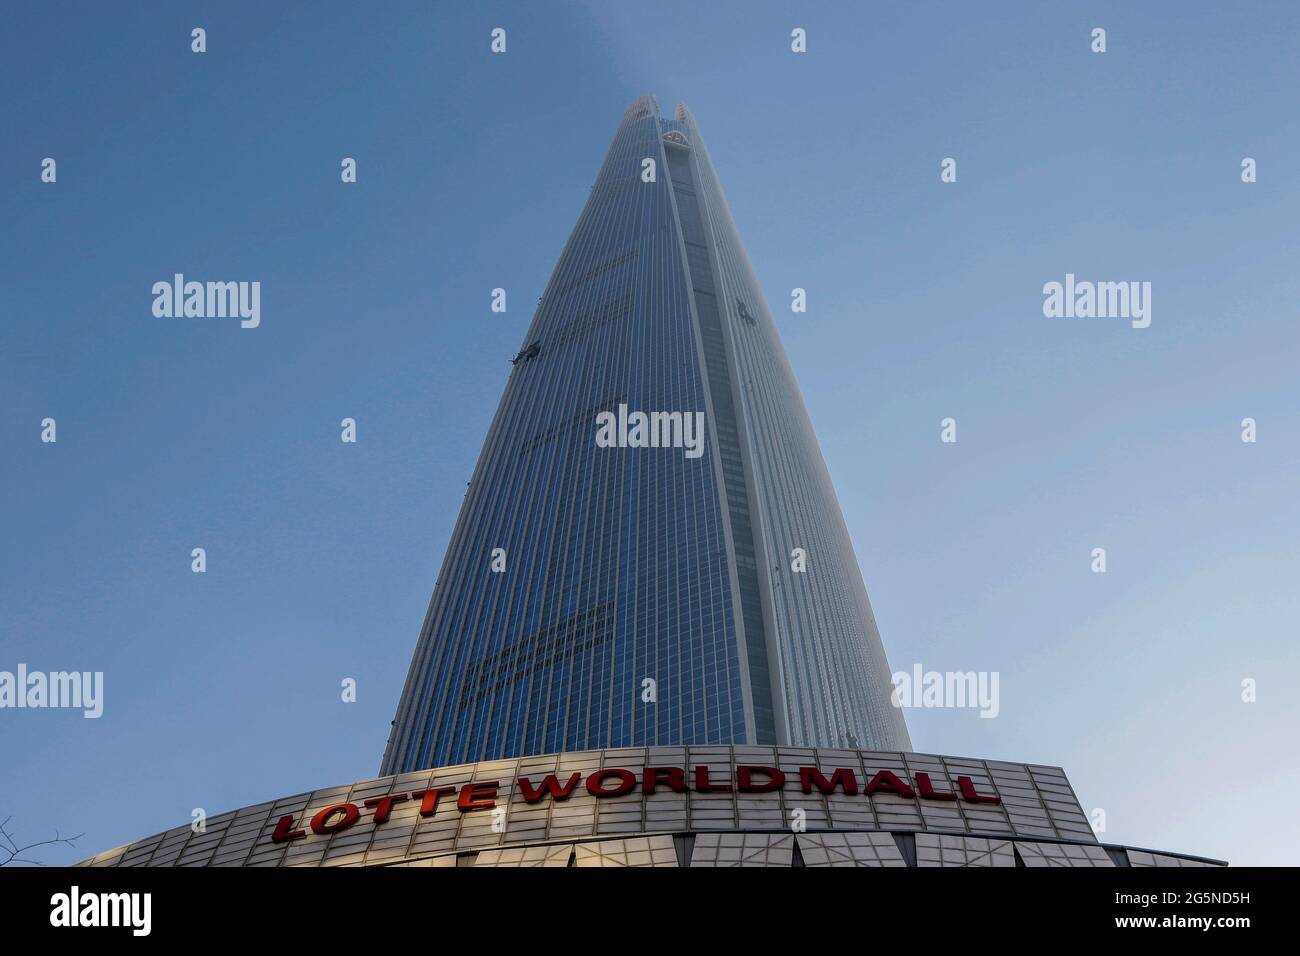 Daylight scene of Lotte World Tower, view from ground. Lotte World Tower is a 123-floor, 554.5-metre (1,819 ft) supertall skyscraper that finished external construction on March 17, 2016. The building's final 123rd floor was topped out on December 22, 2015. It is currently the tallest building in the OECD, and is the 5th tallest building in the world. Stock Photo